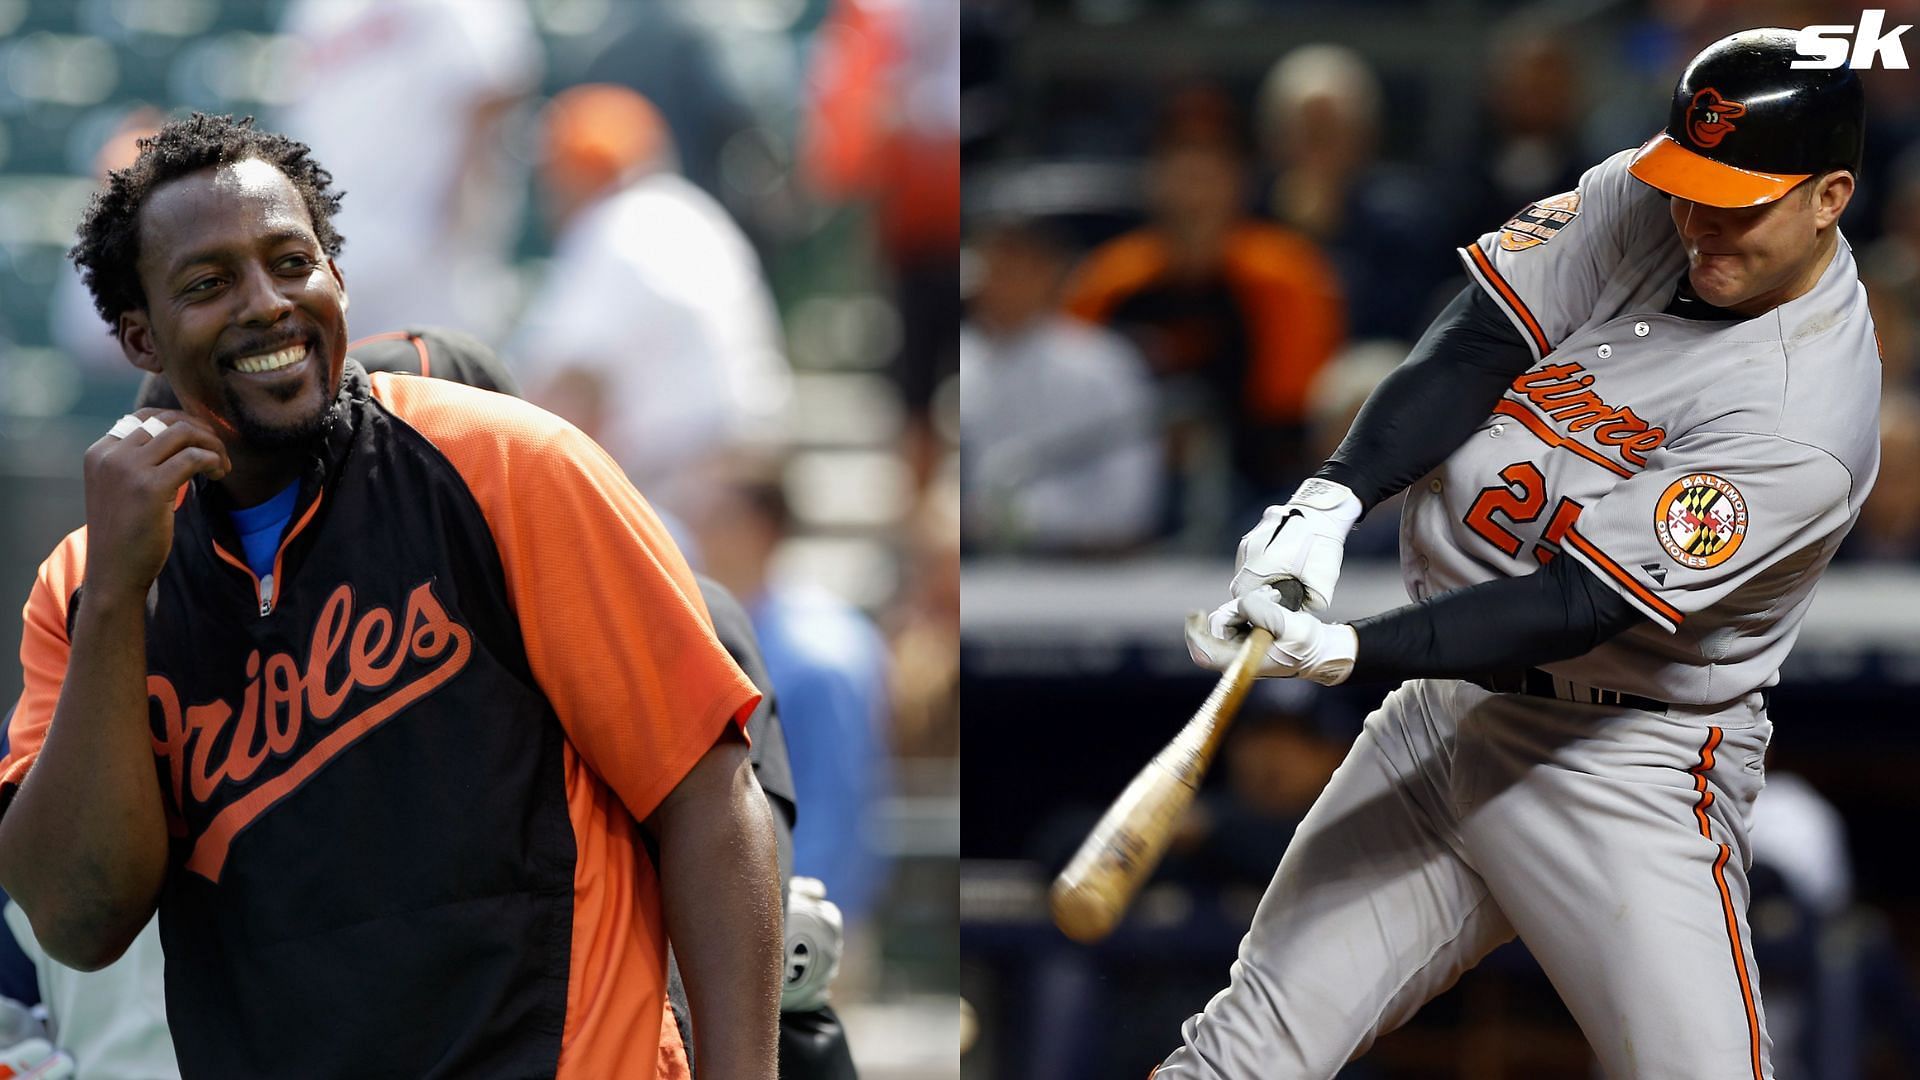 Which Hall of Famers played for the Orioles? MLB Immaculate Grid answers  September 14